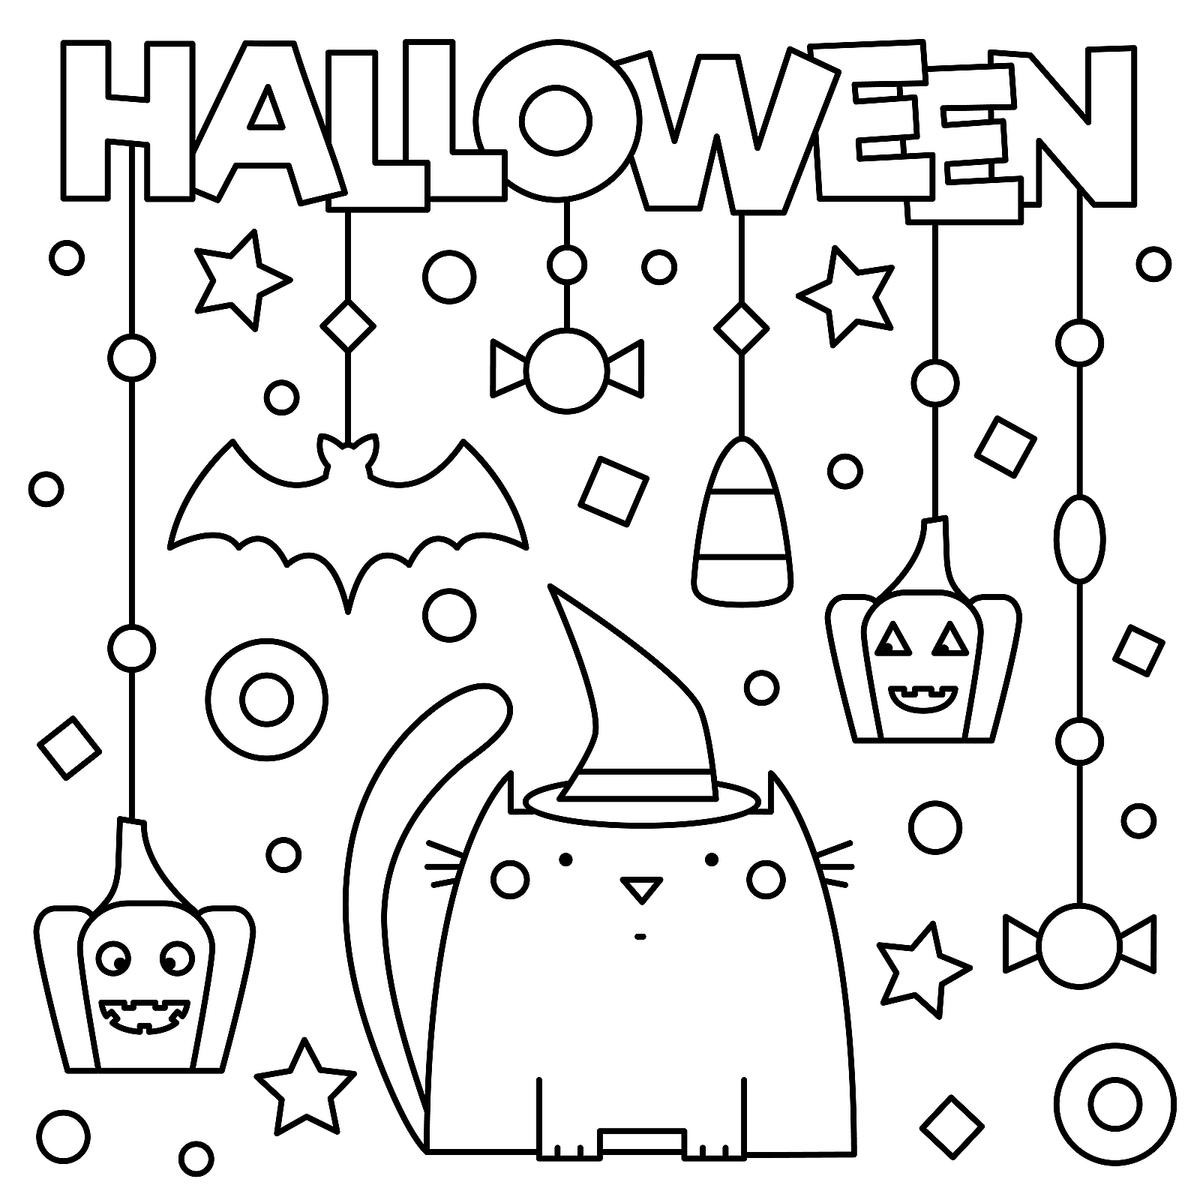 Halloween Kids Coloring Pages
 Halloween Coloring Pages 10 Free Spooky Printable